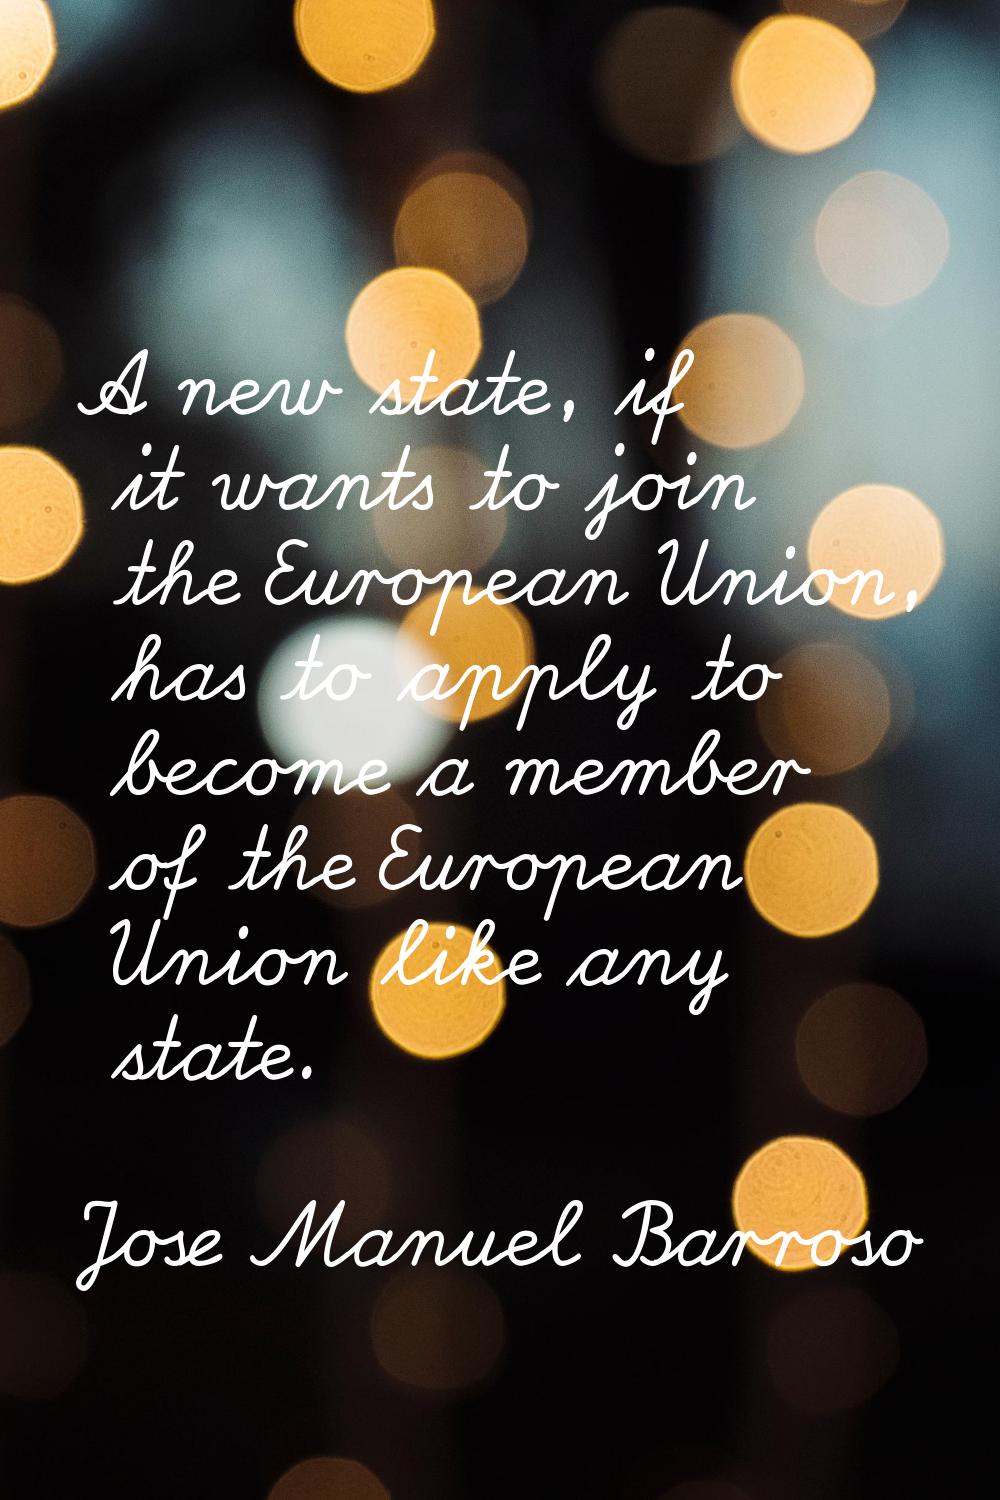 A new state, if it wants to join the European Union, has to apply to become a member of the Europea